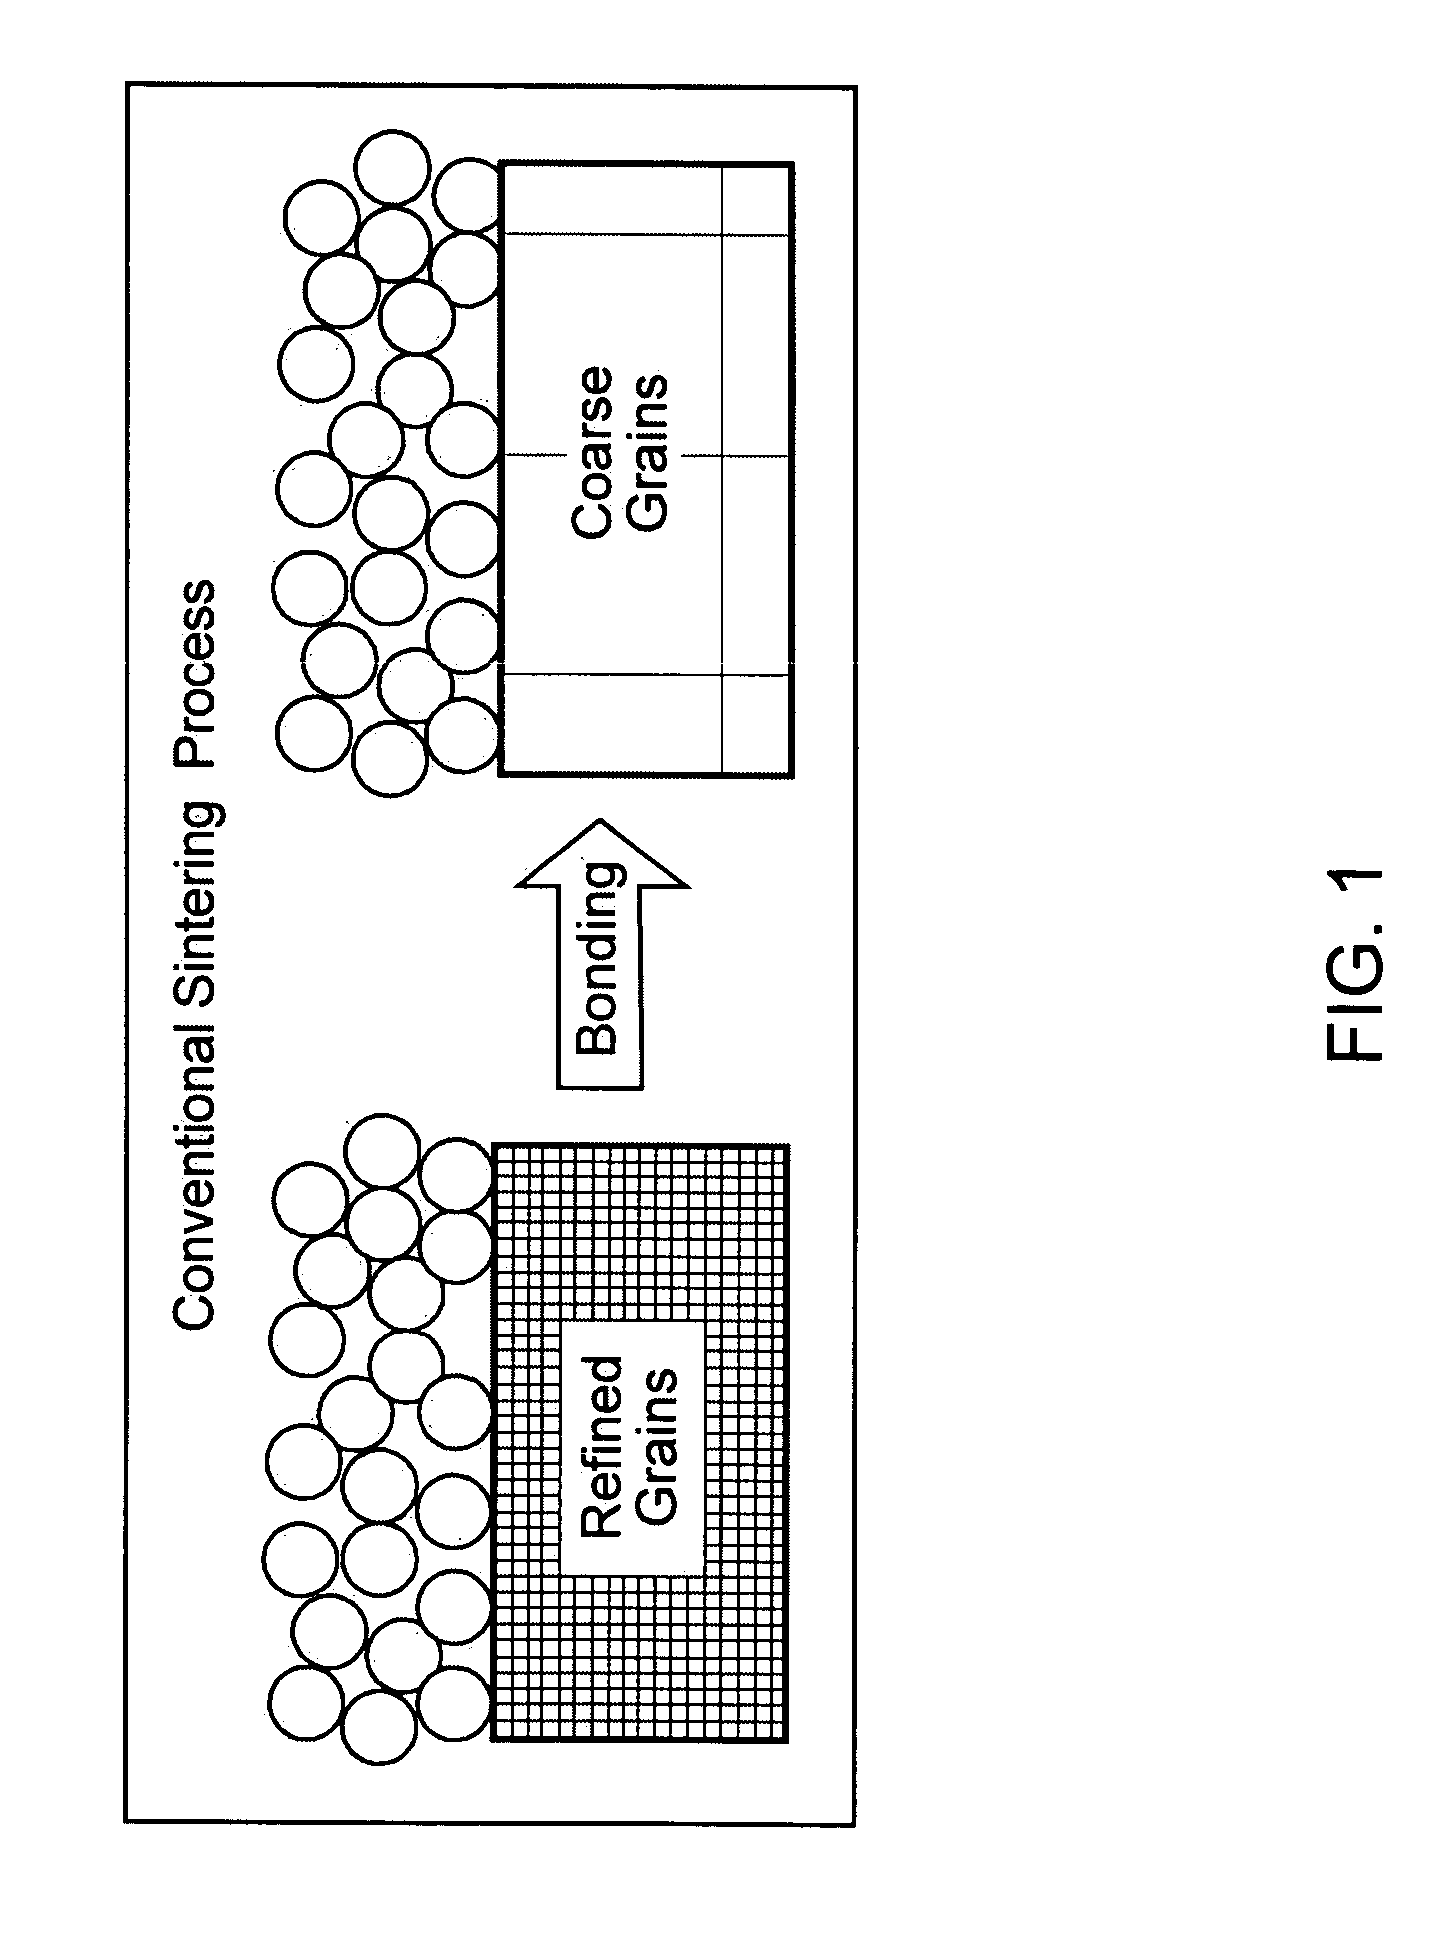 Pulsed current sintering for surfaces of medical implants